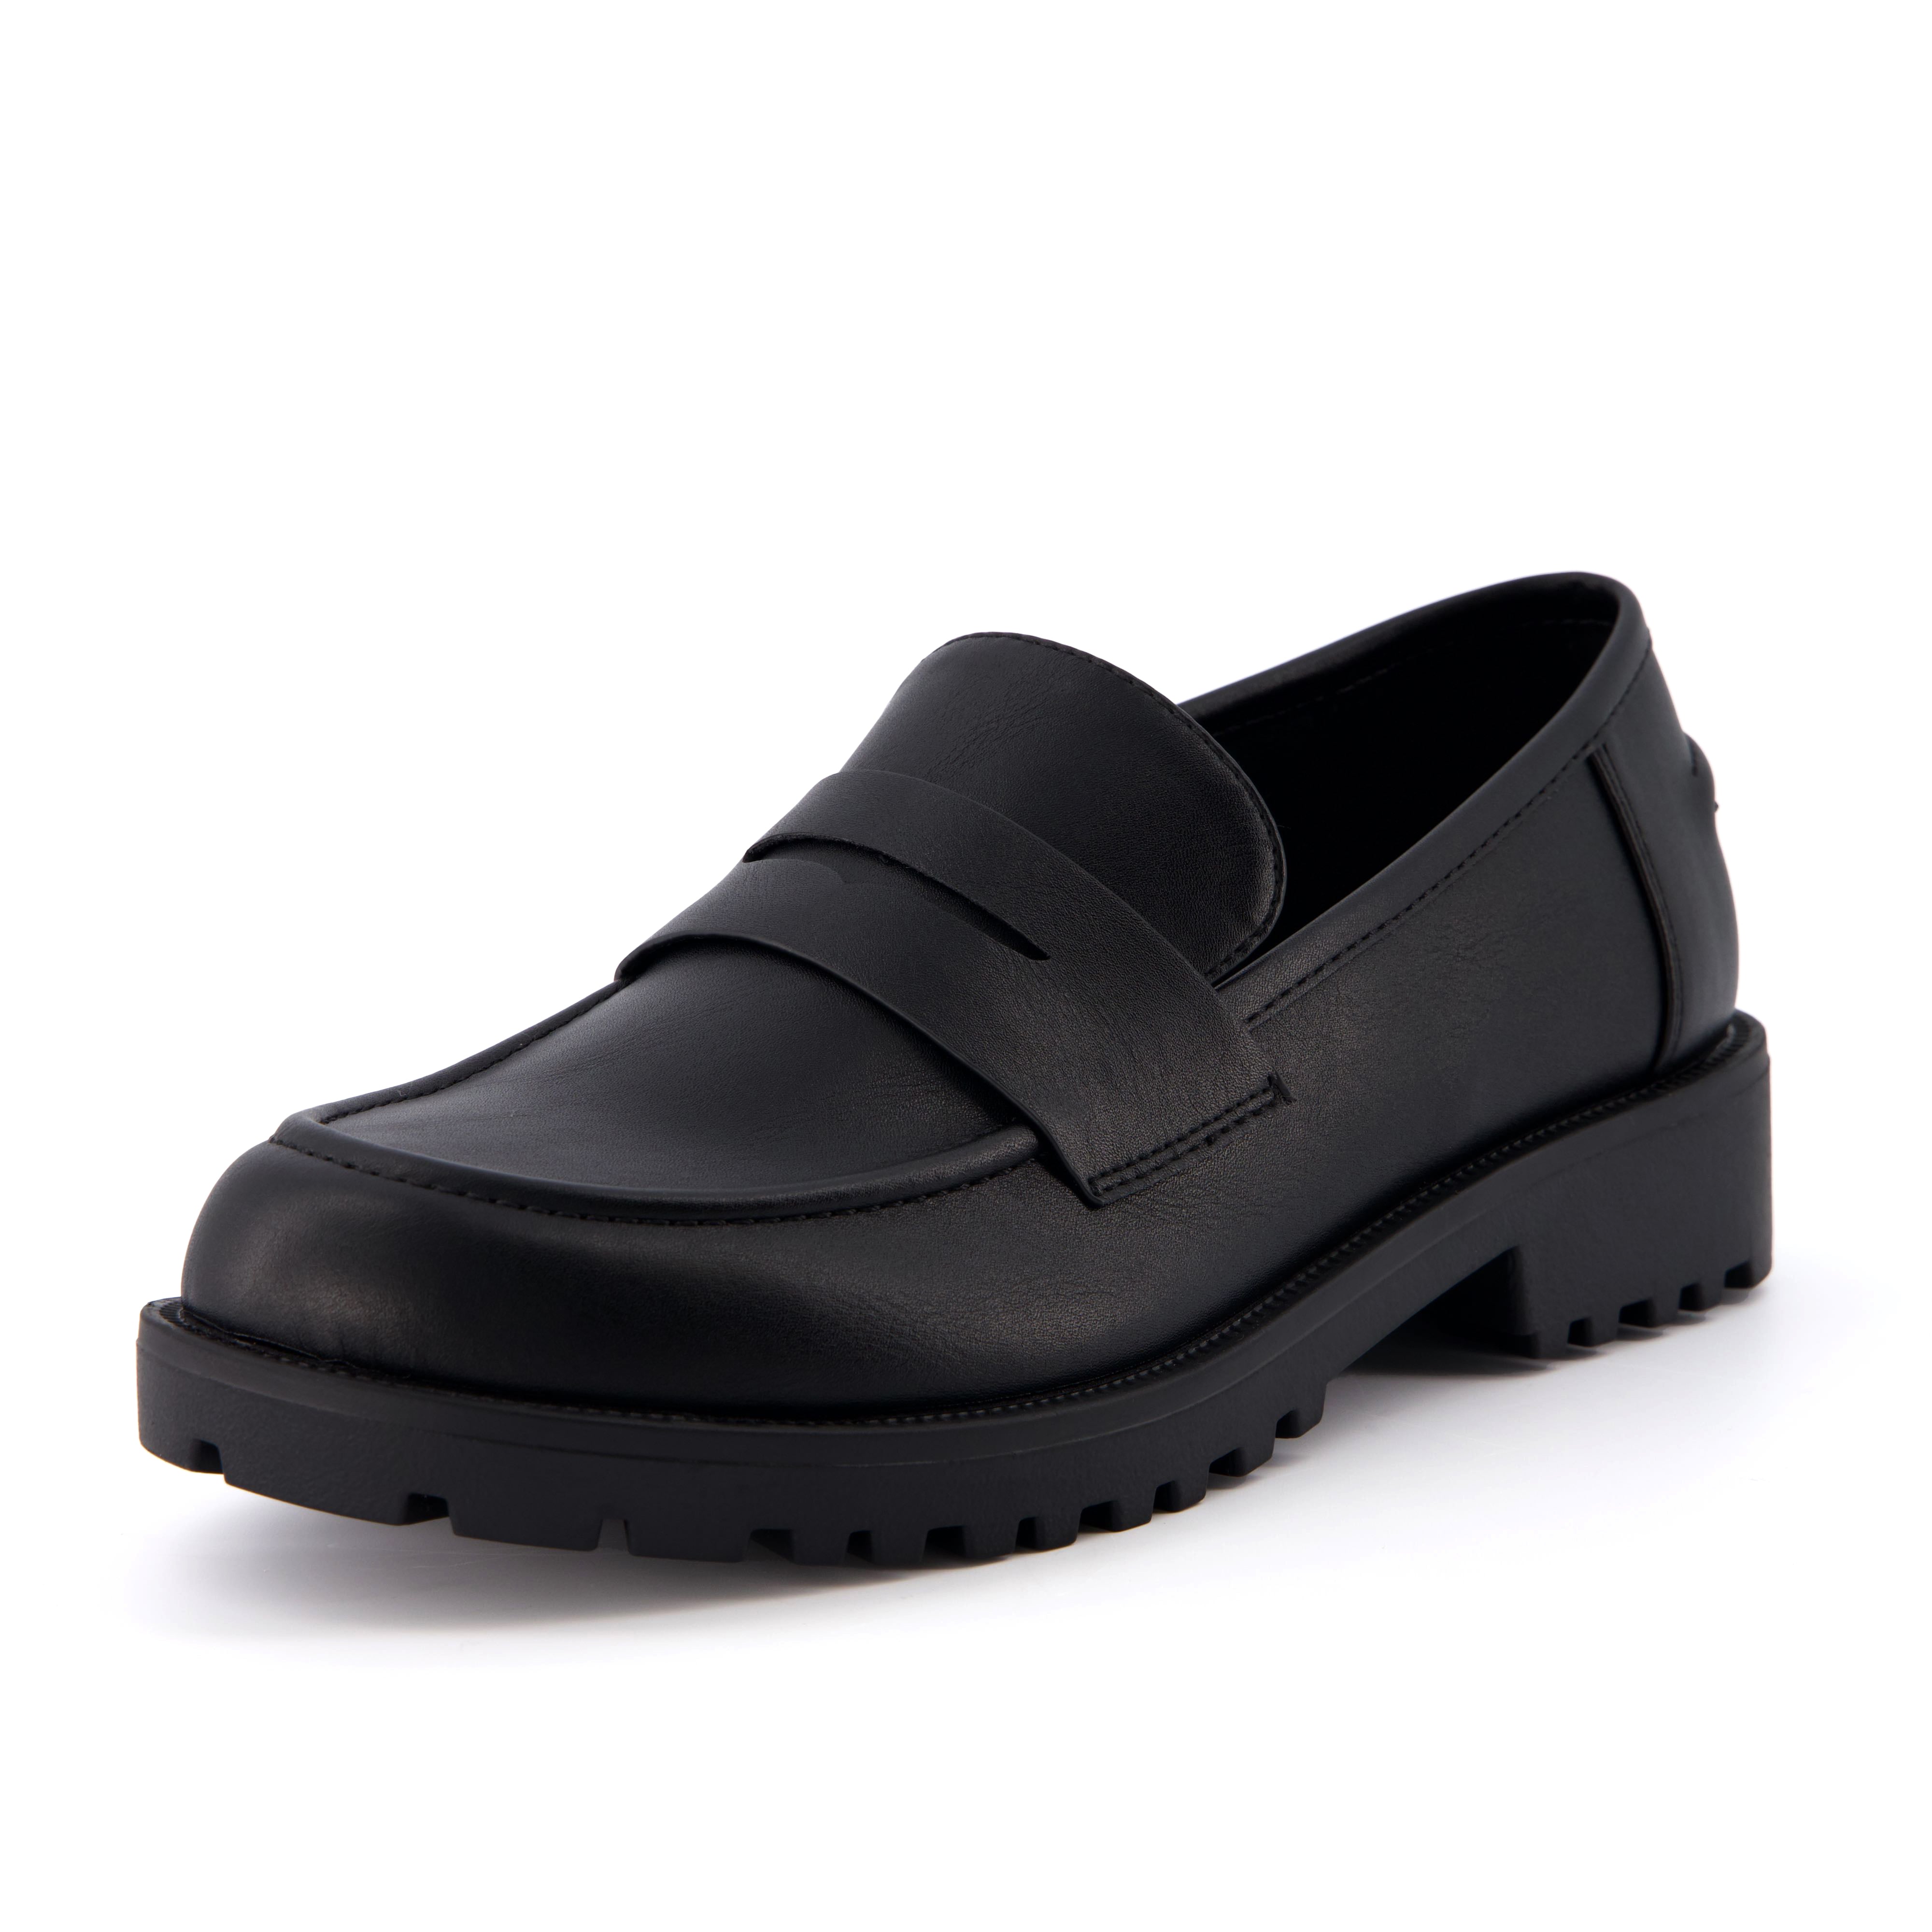 Rizzo Slip On Loafer